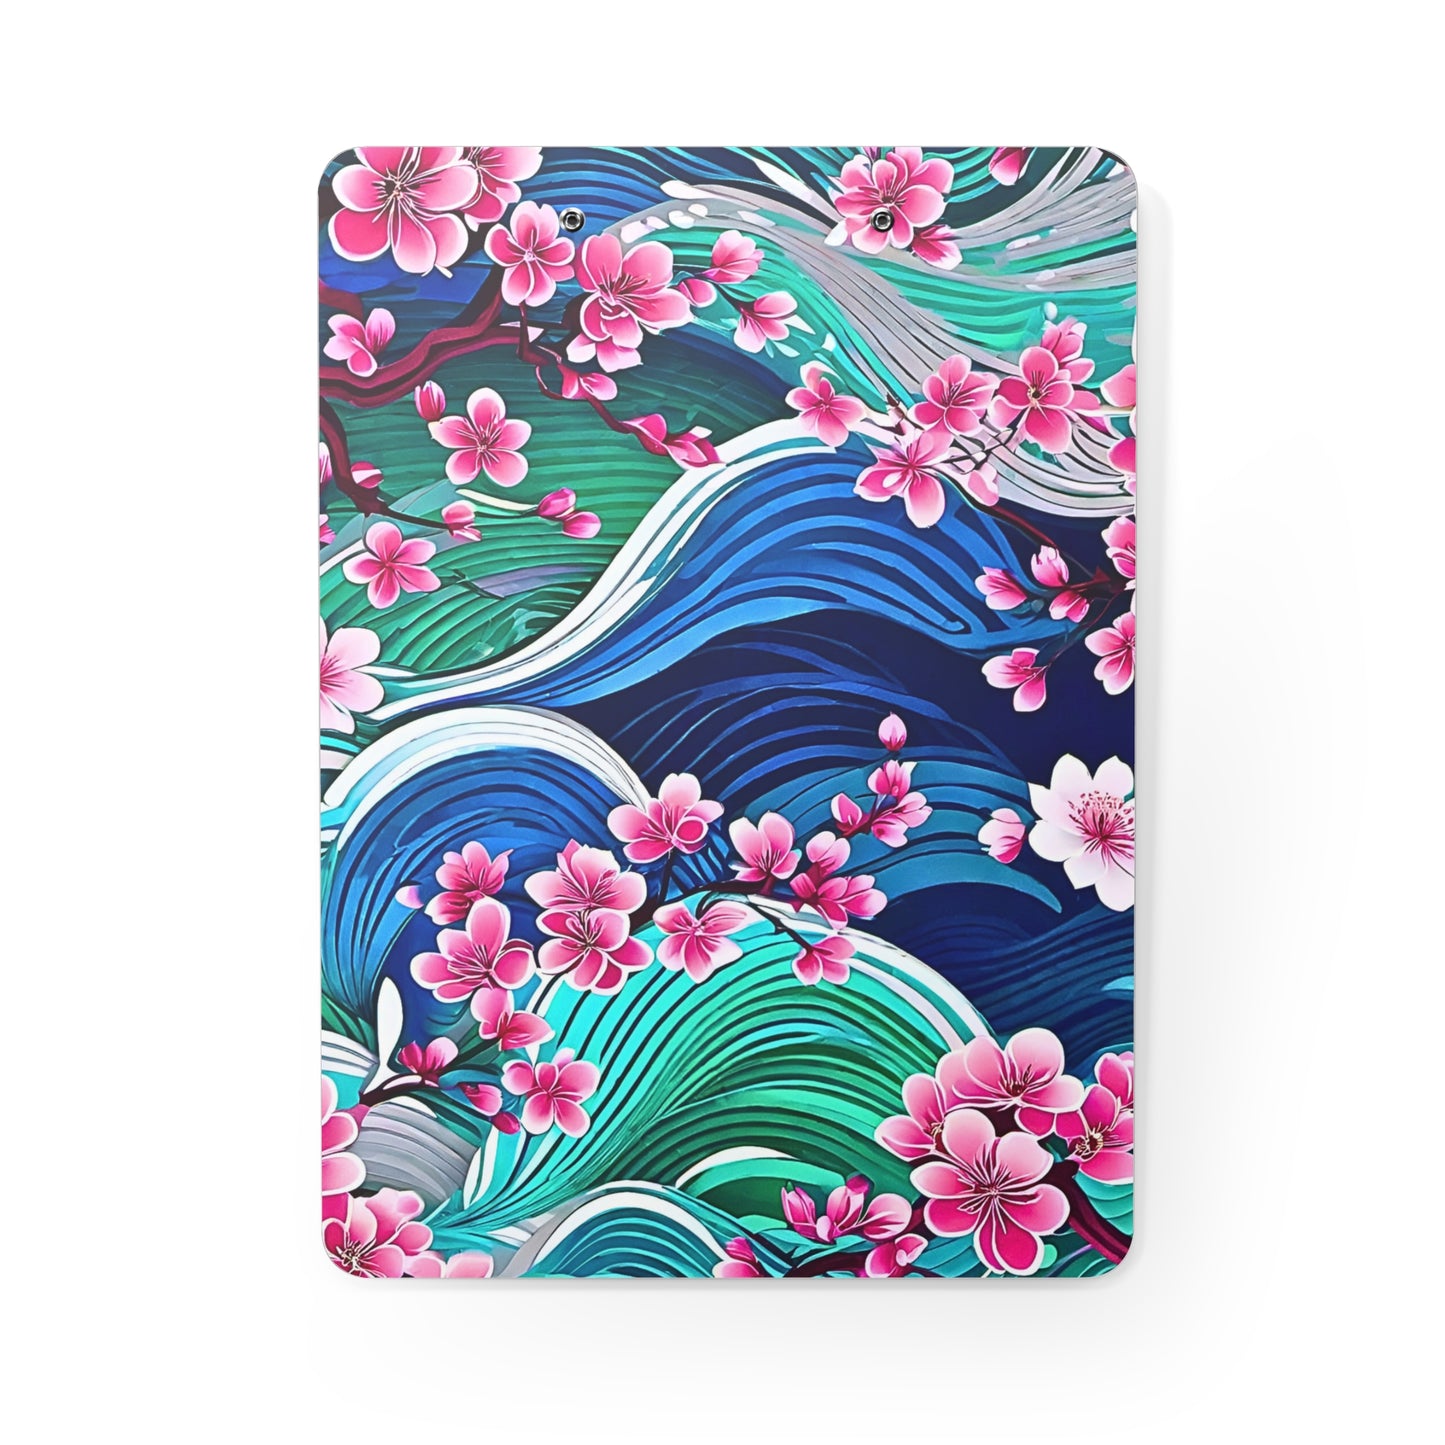 Japanese Mountains Cherry Blossoms Decorative Writing Desk Clipboard